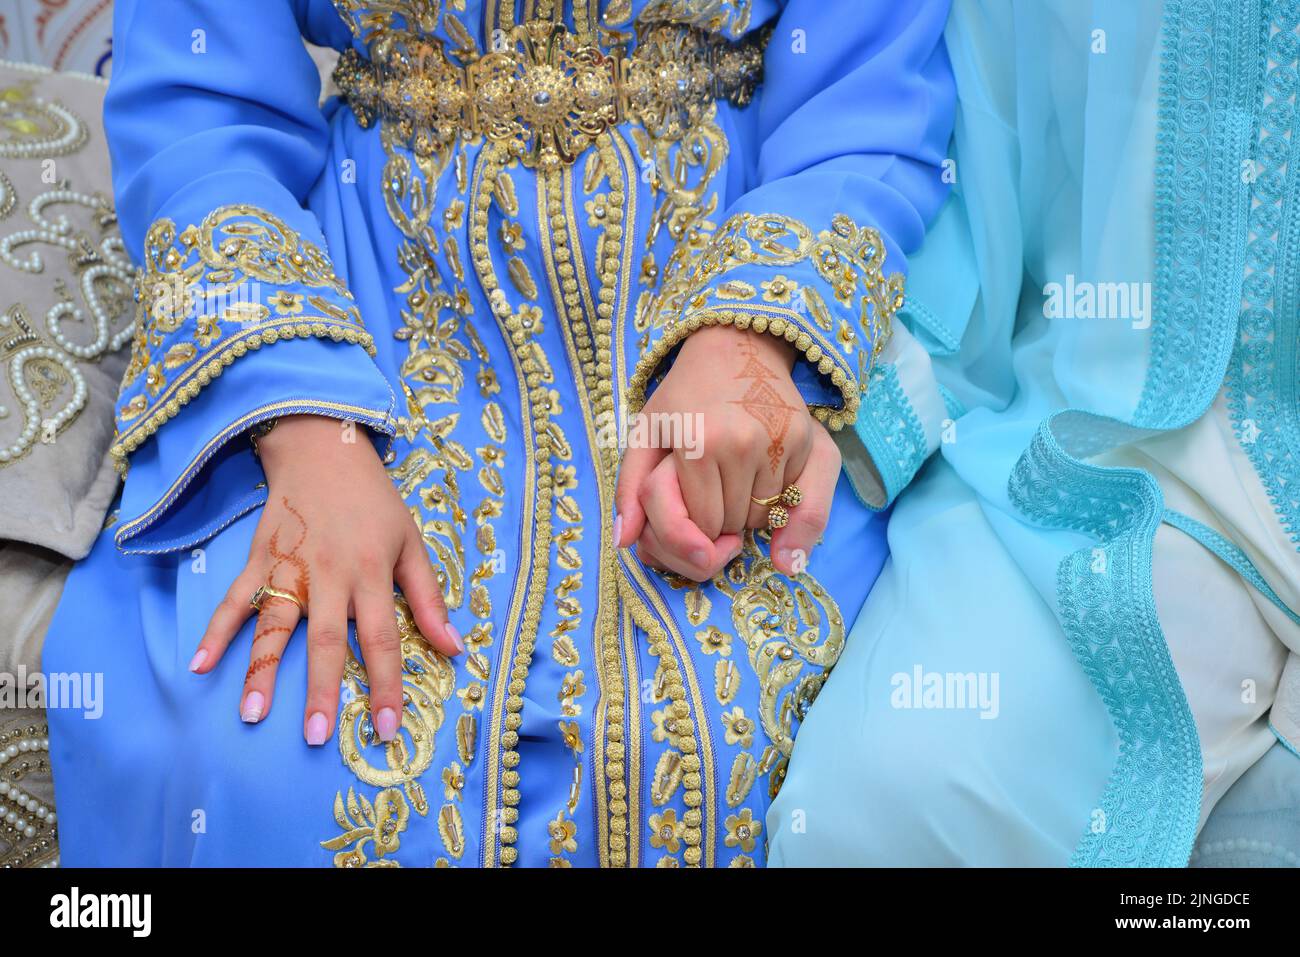 Moroccan bride and groom wearing traditional Moroccan clothes Stock Photo